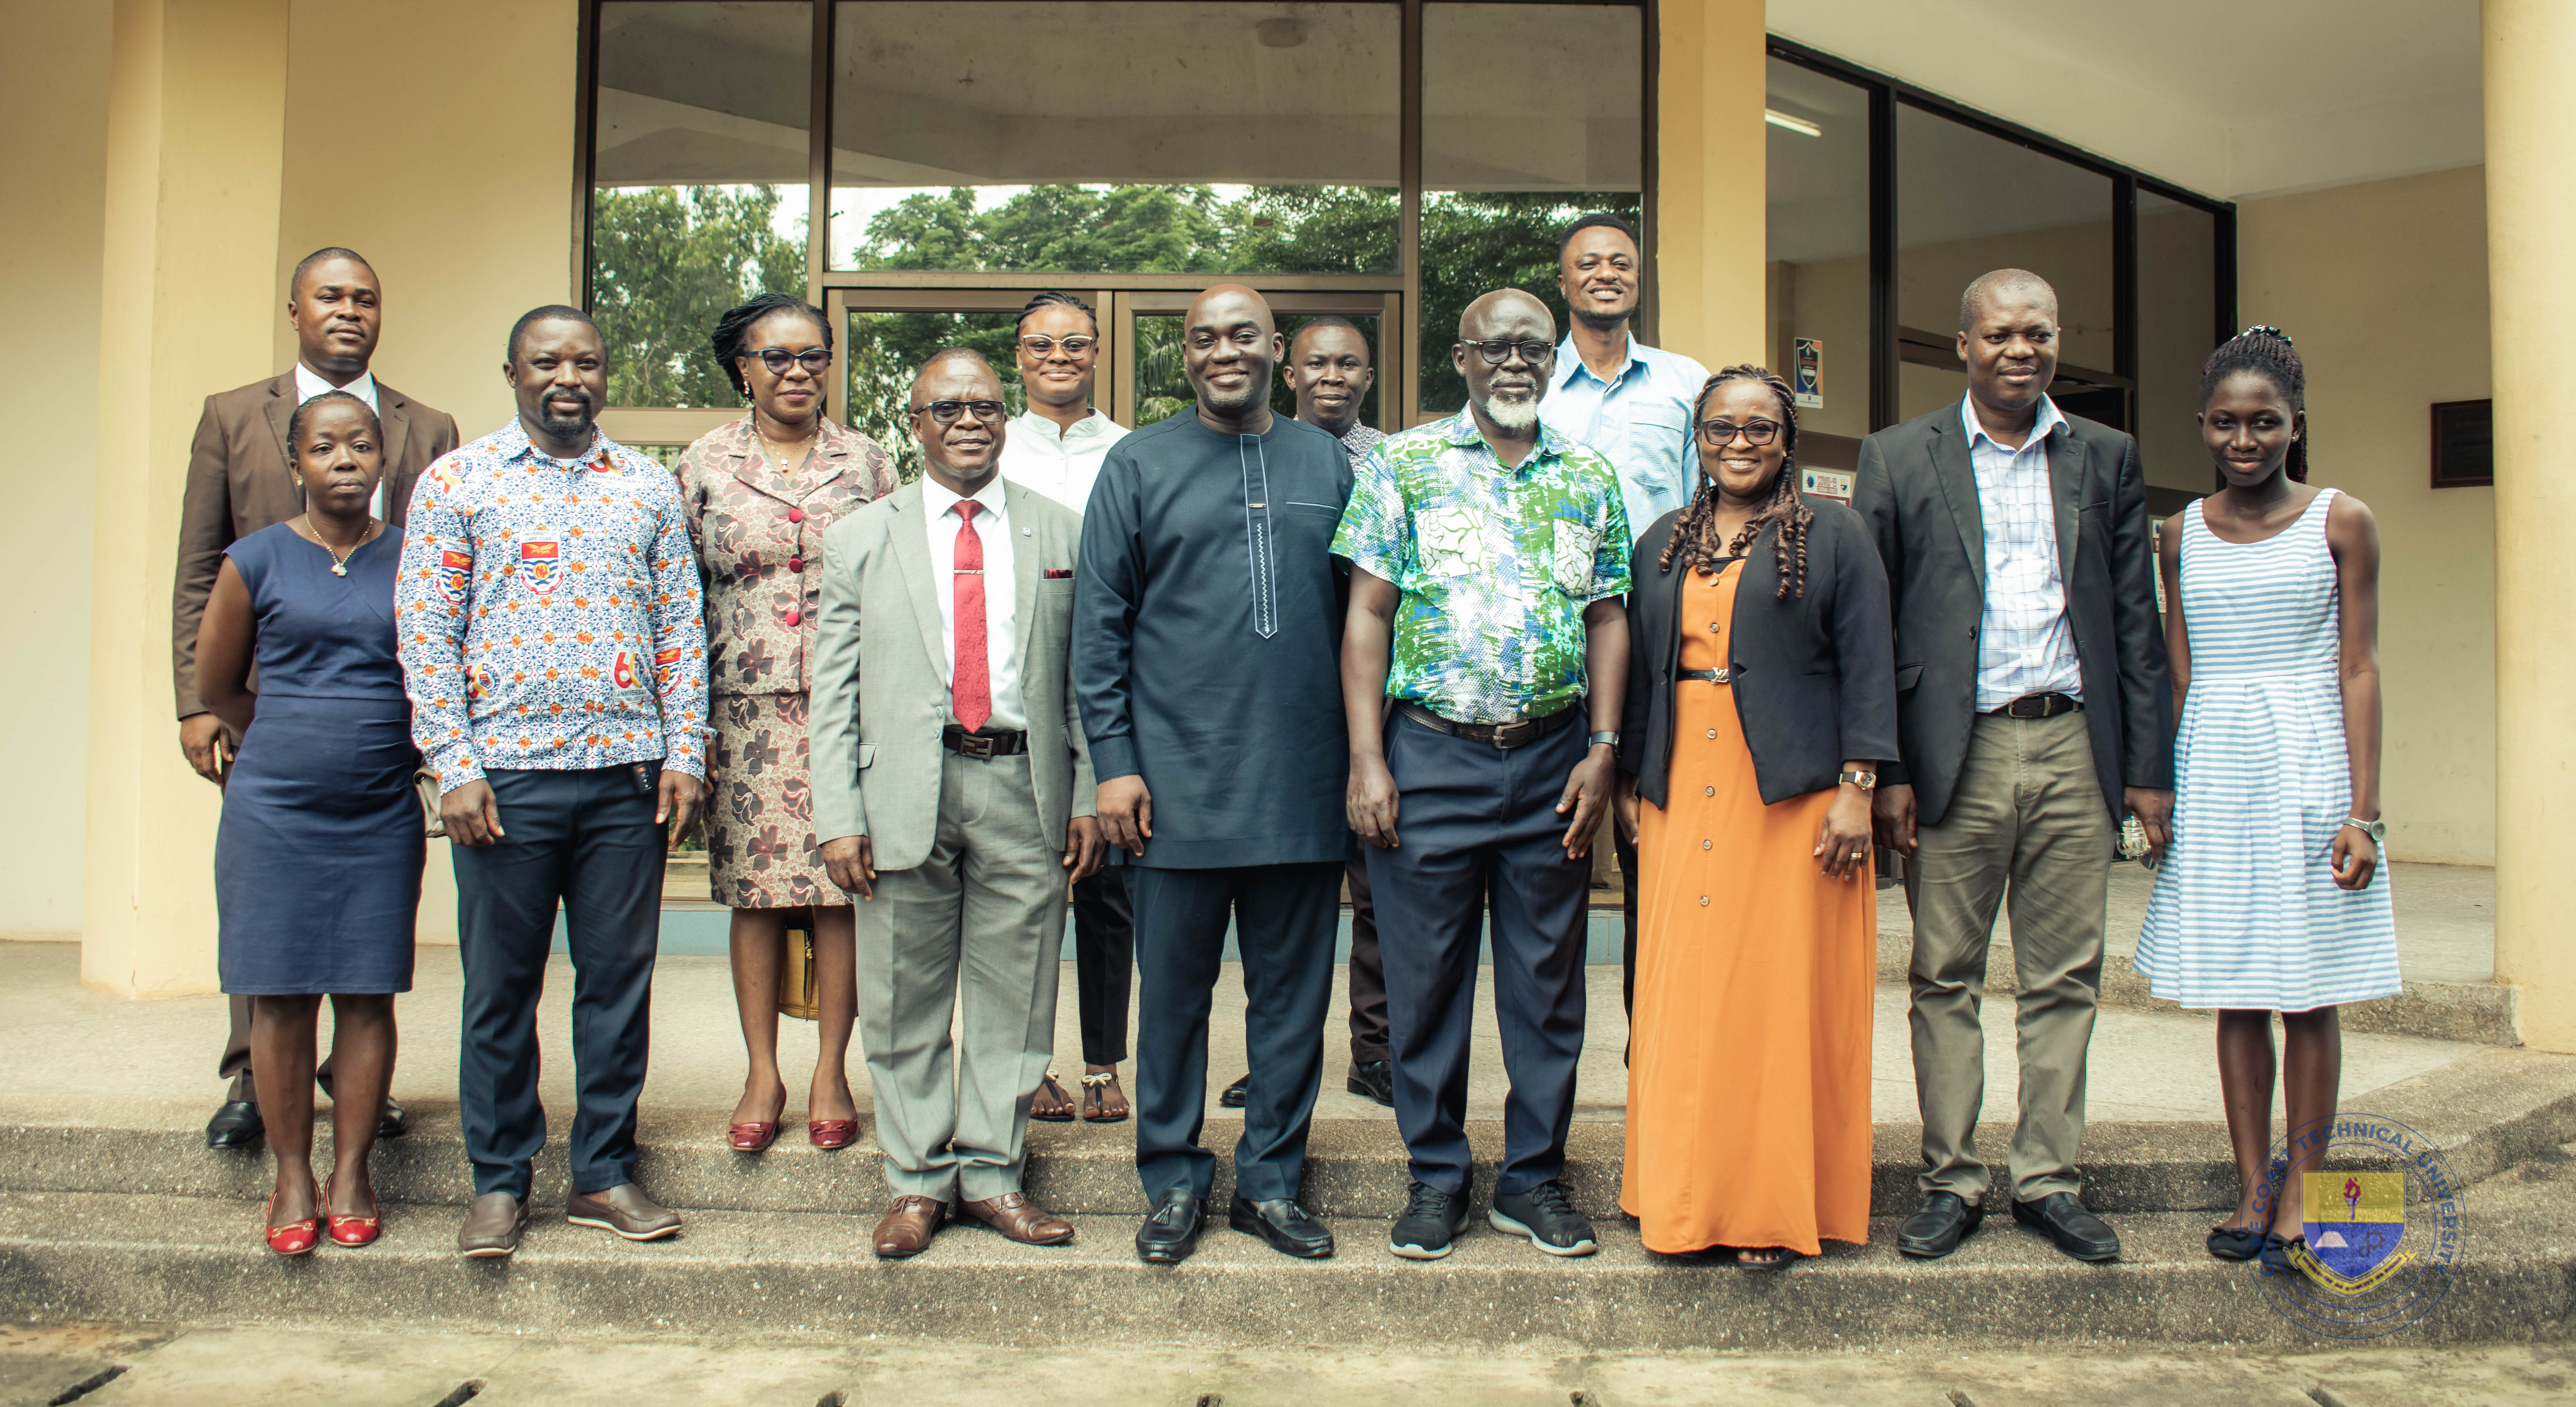 STAFF OF THE COLLEGE OF HUMANITIES AND LEGAL STUDIES (CHLS), UCC PAYS A COURTESY CALL ON THE VICE-CHANCELLOR OF  CAPE COAST TECHNICAL UNIVERSITY (CCTU)